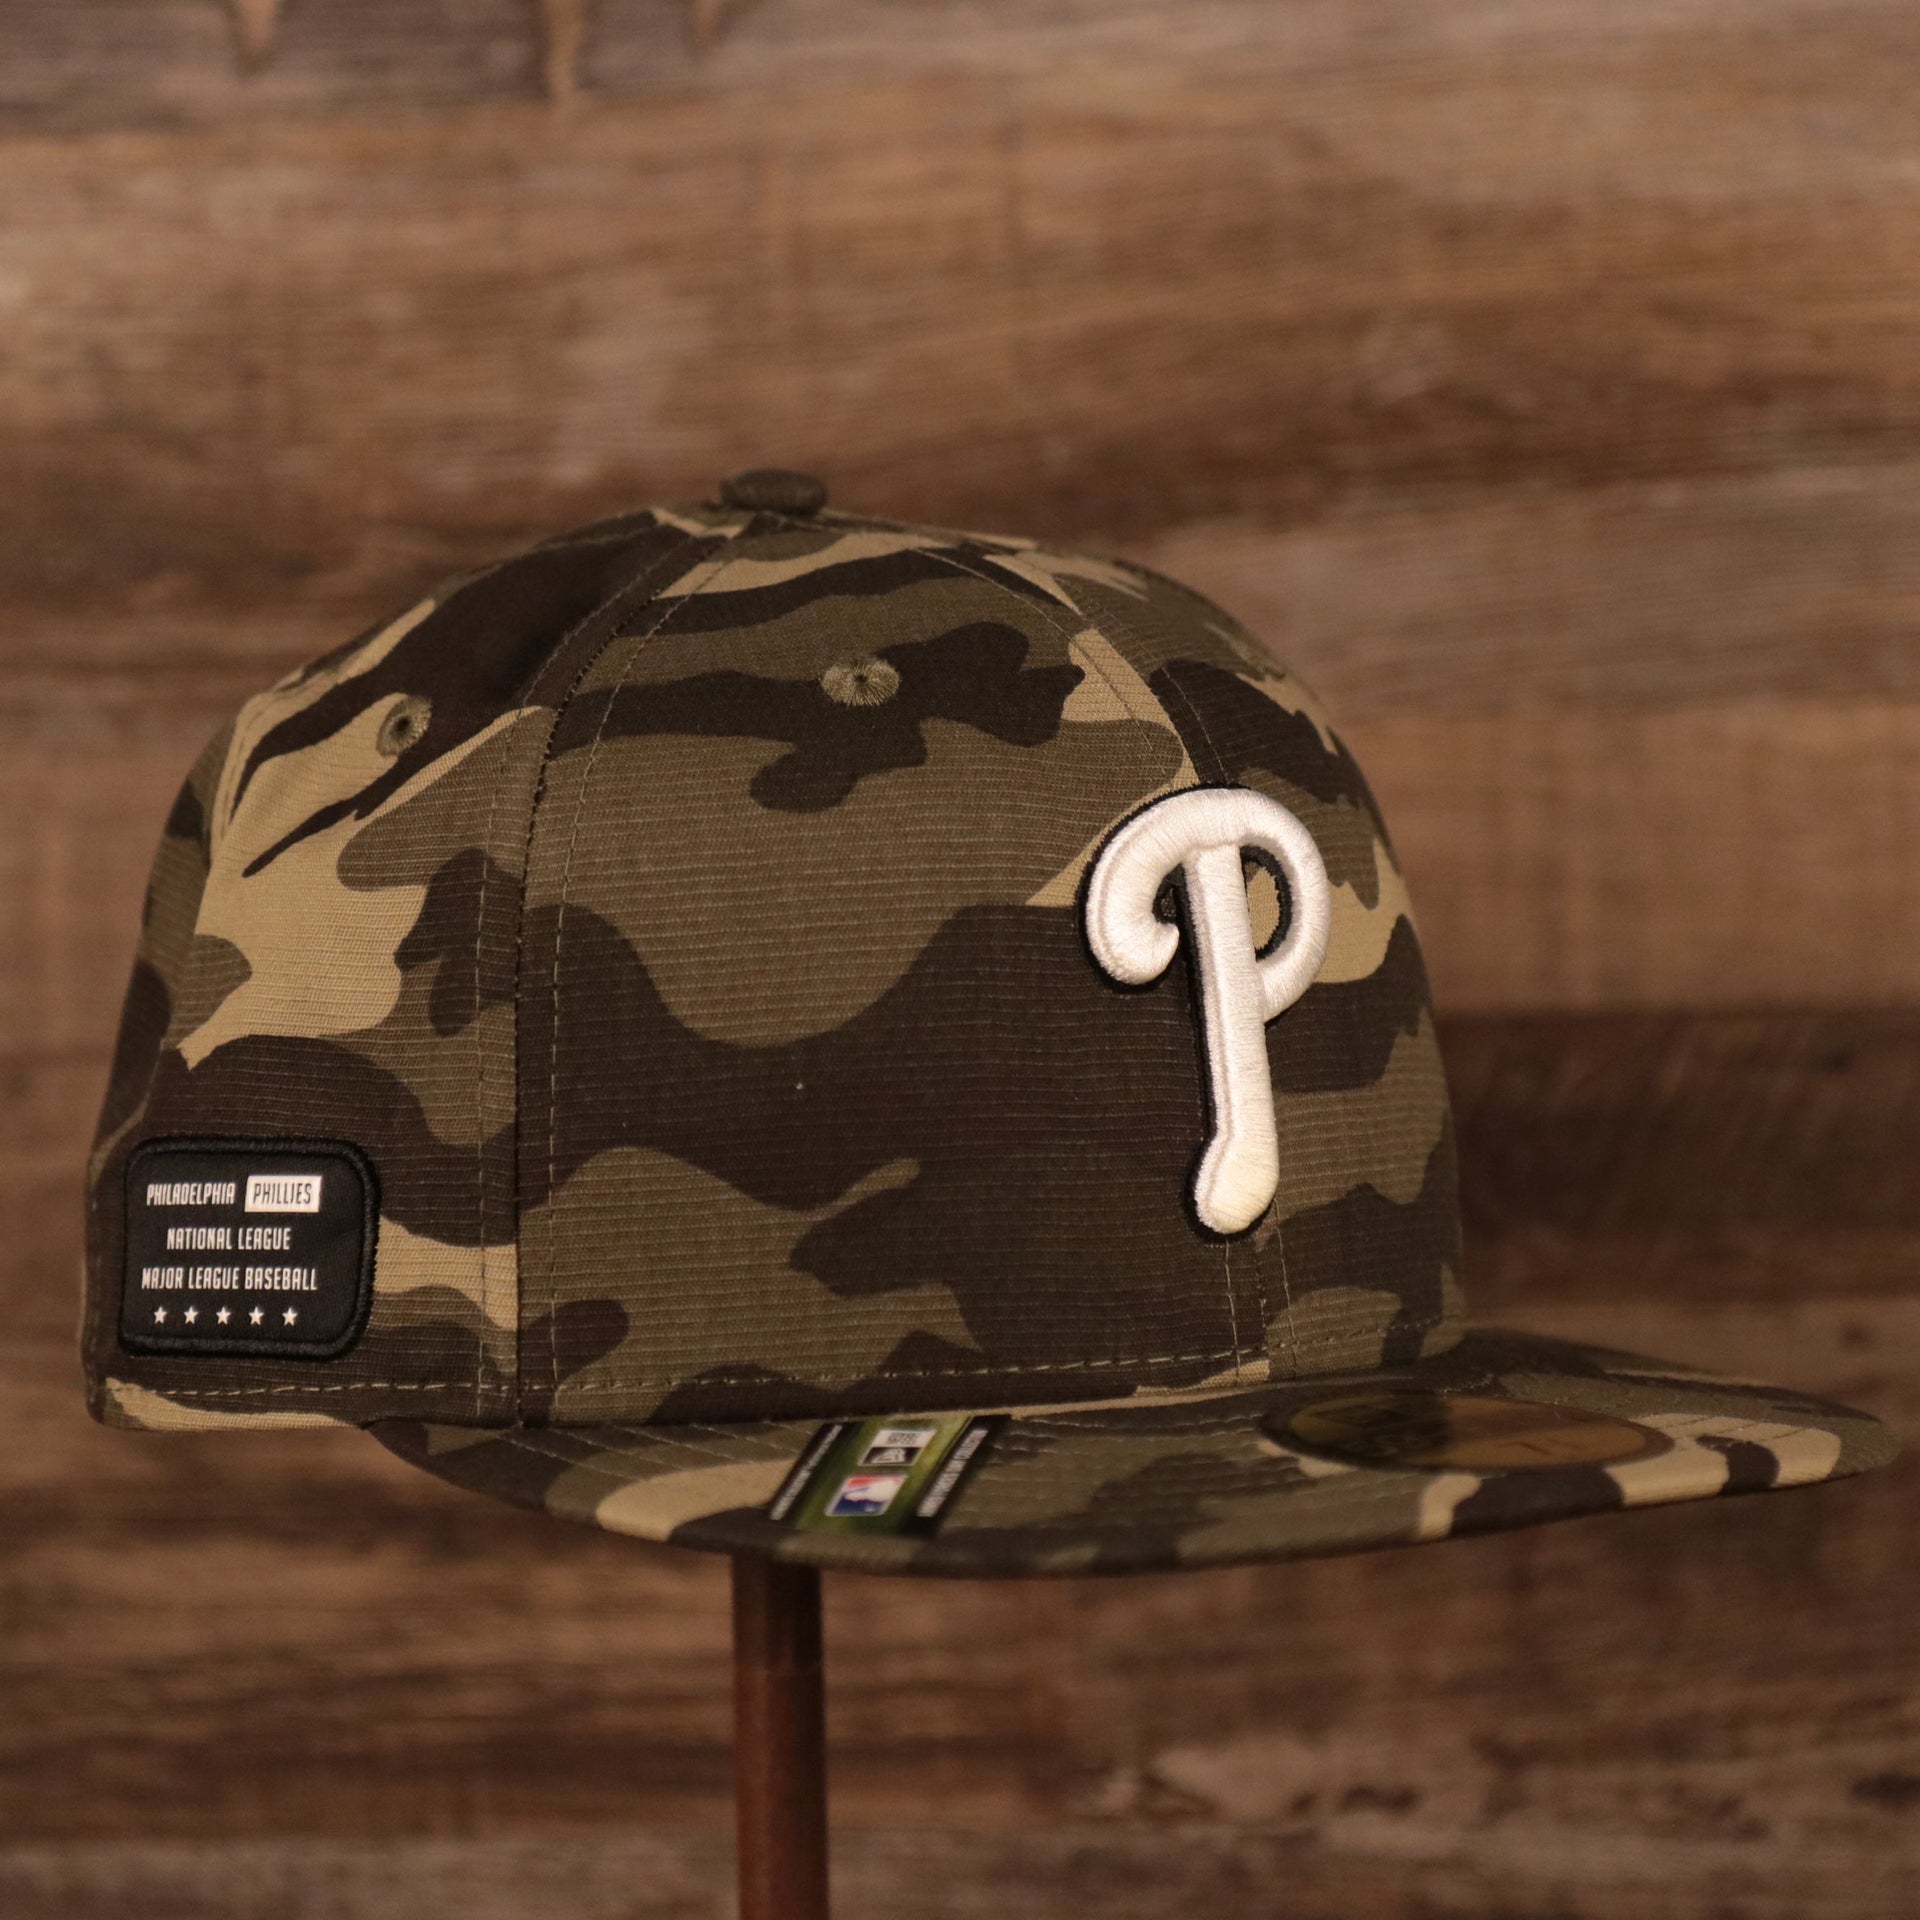 The 2021 Memorial Day 59fifty fitted cap with black bottom brim for the Philadelphia Phillies.